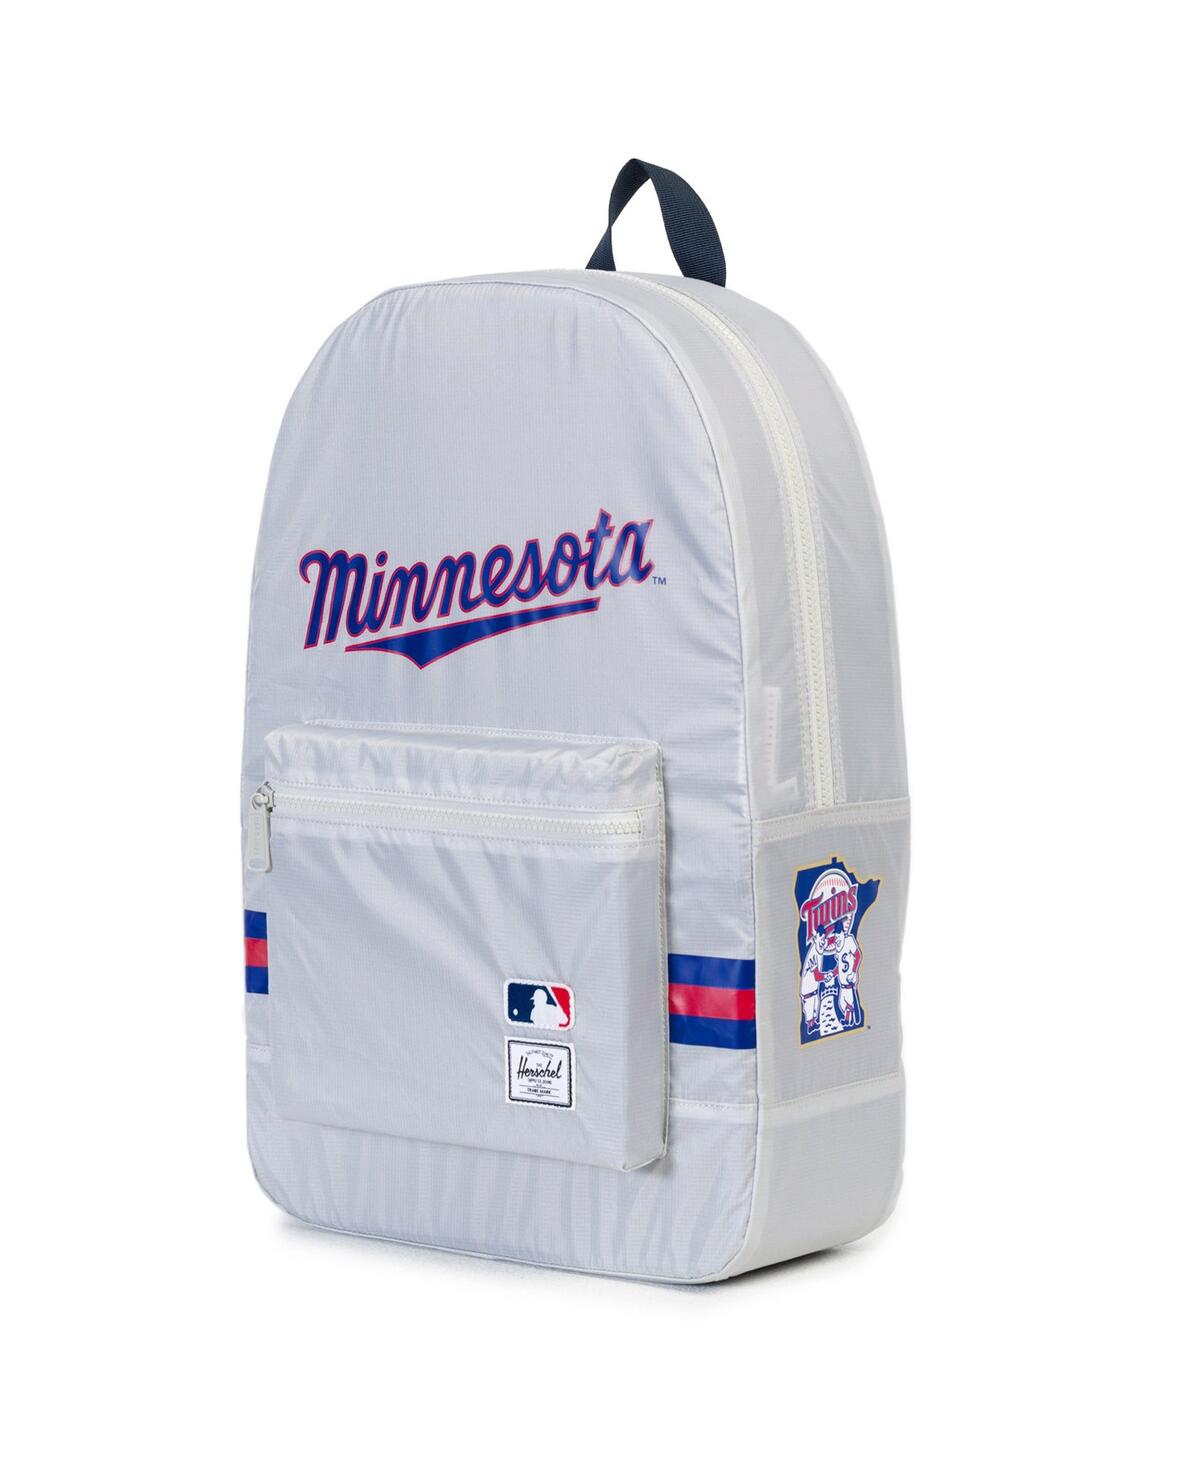 Supply Co. Minnesota Twins Packable Daypack - Gray